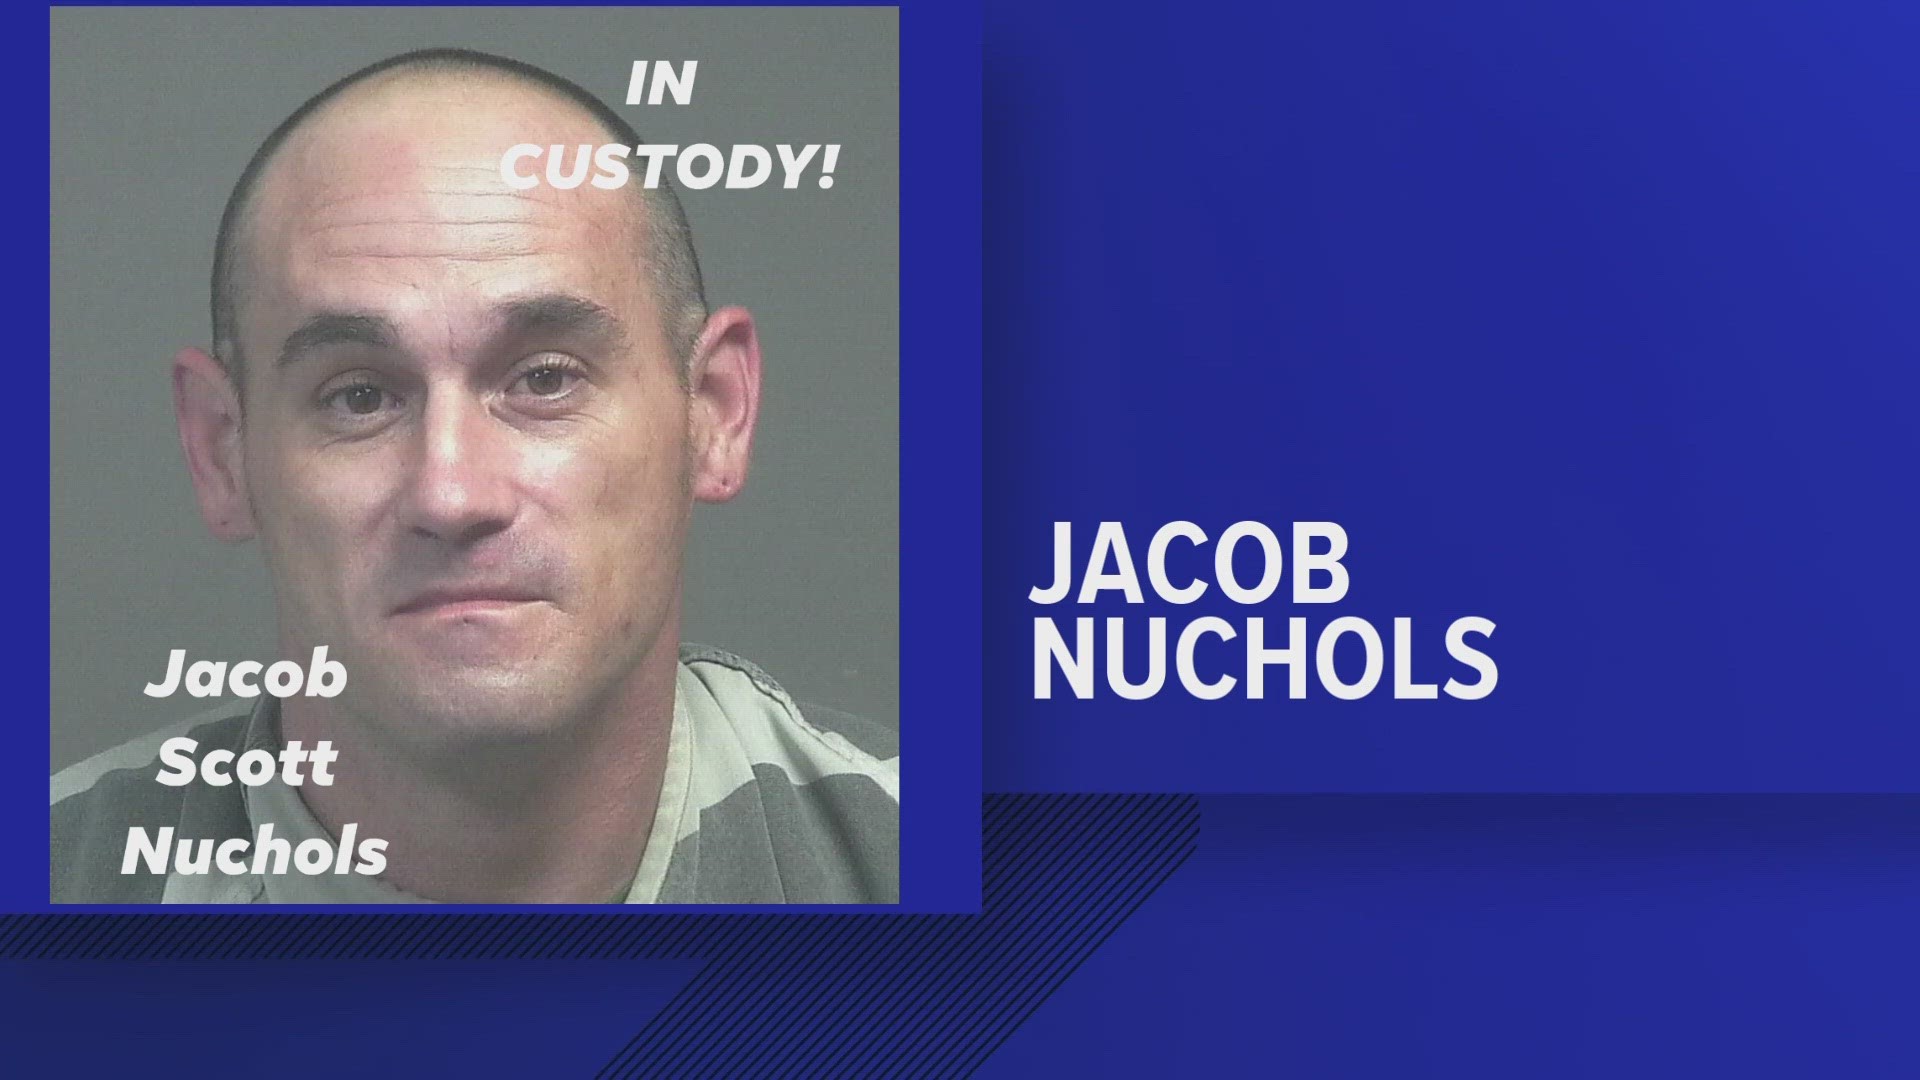 The Blount County Sheriff's Office identified him as Jacob Scott Nuchols, 37, from Maryville.